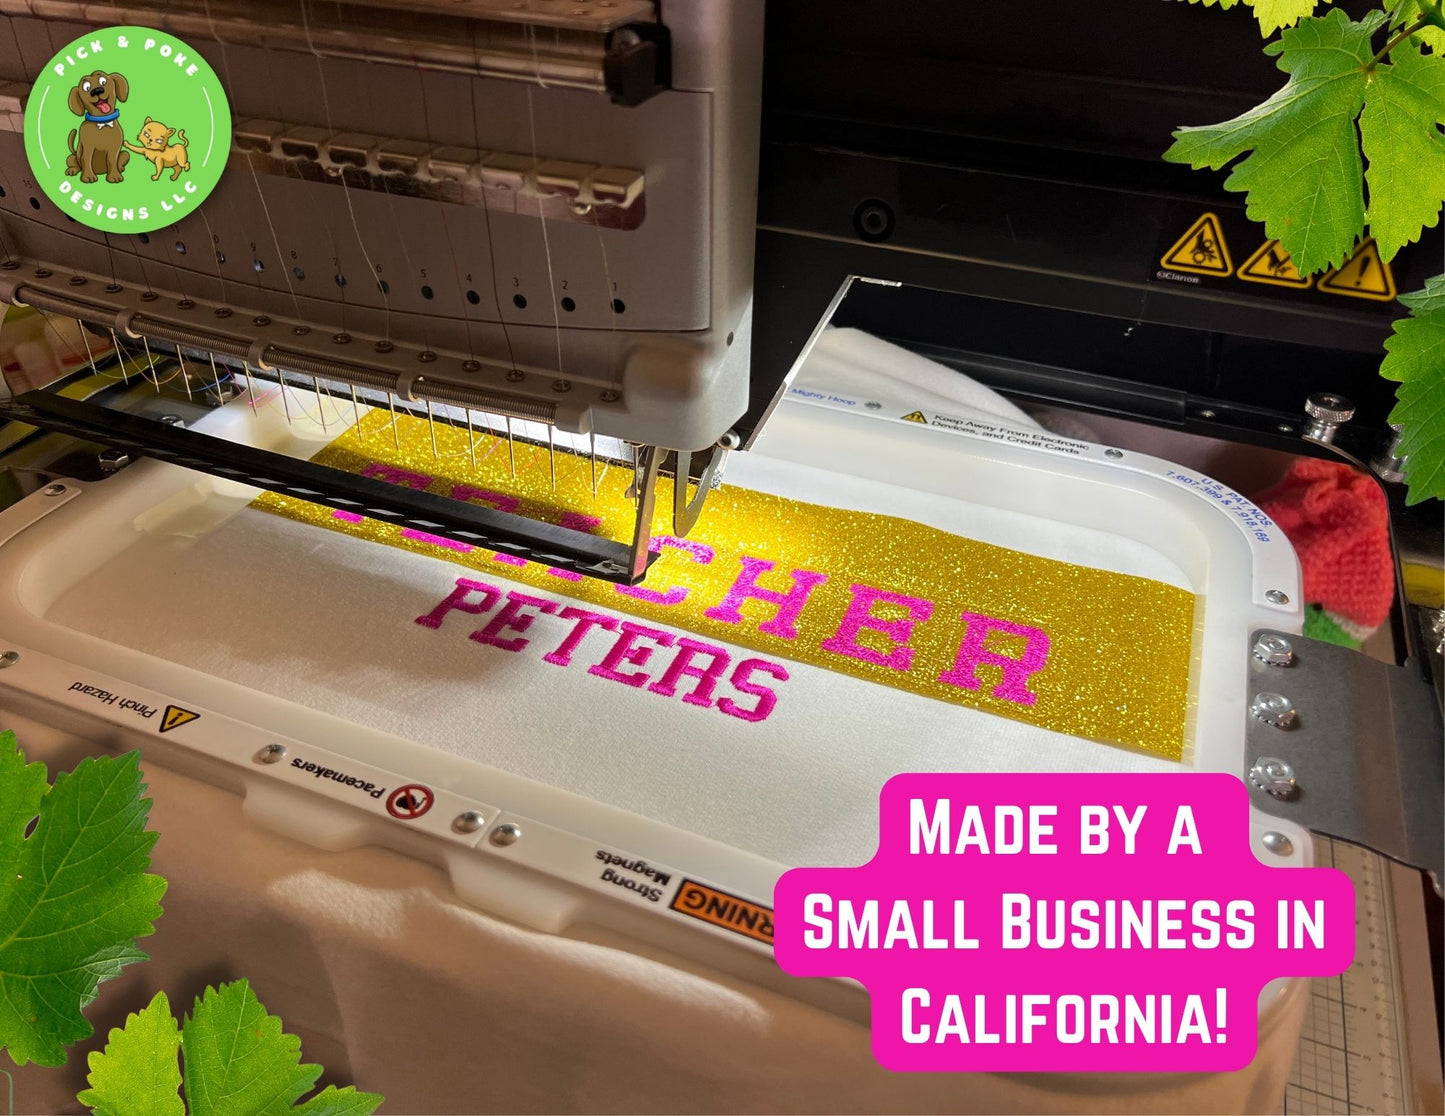 Design is made a small business in California. 